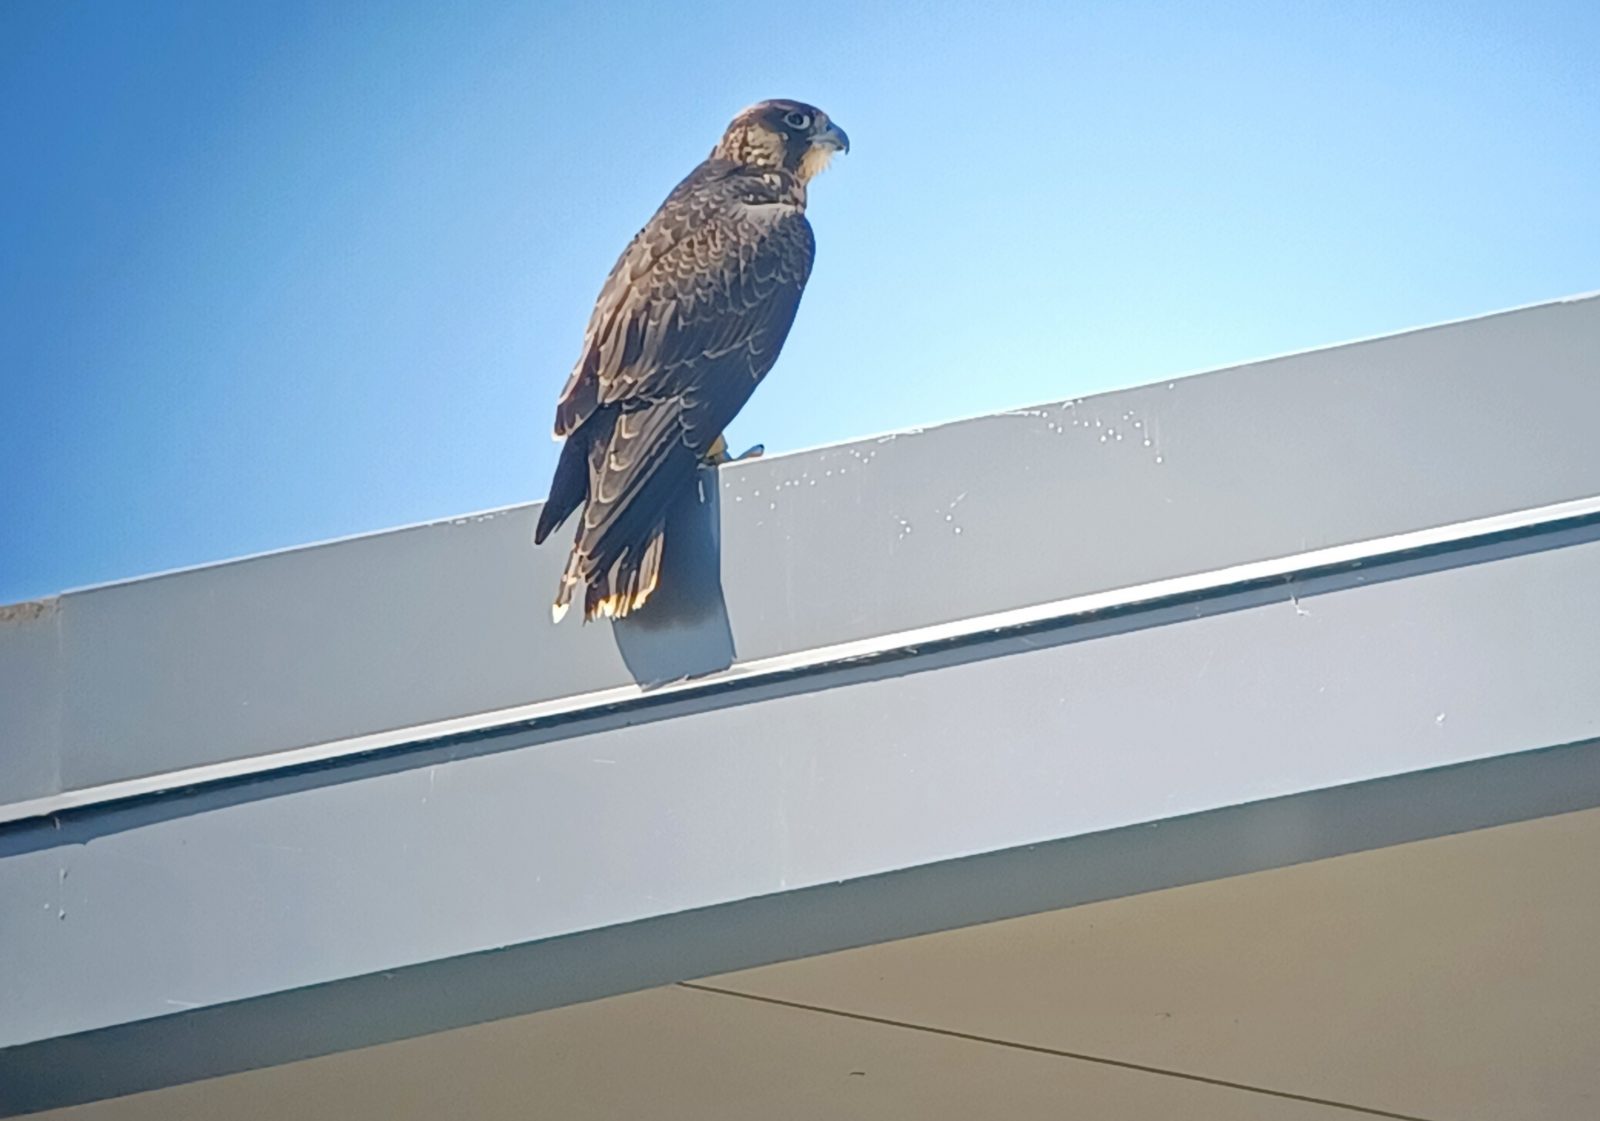 An image of a falcon named Yellow perched on the roof of a building